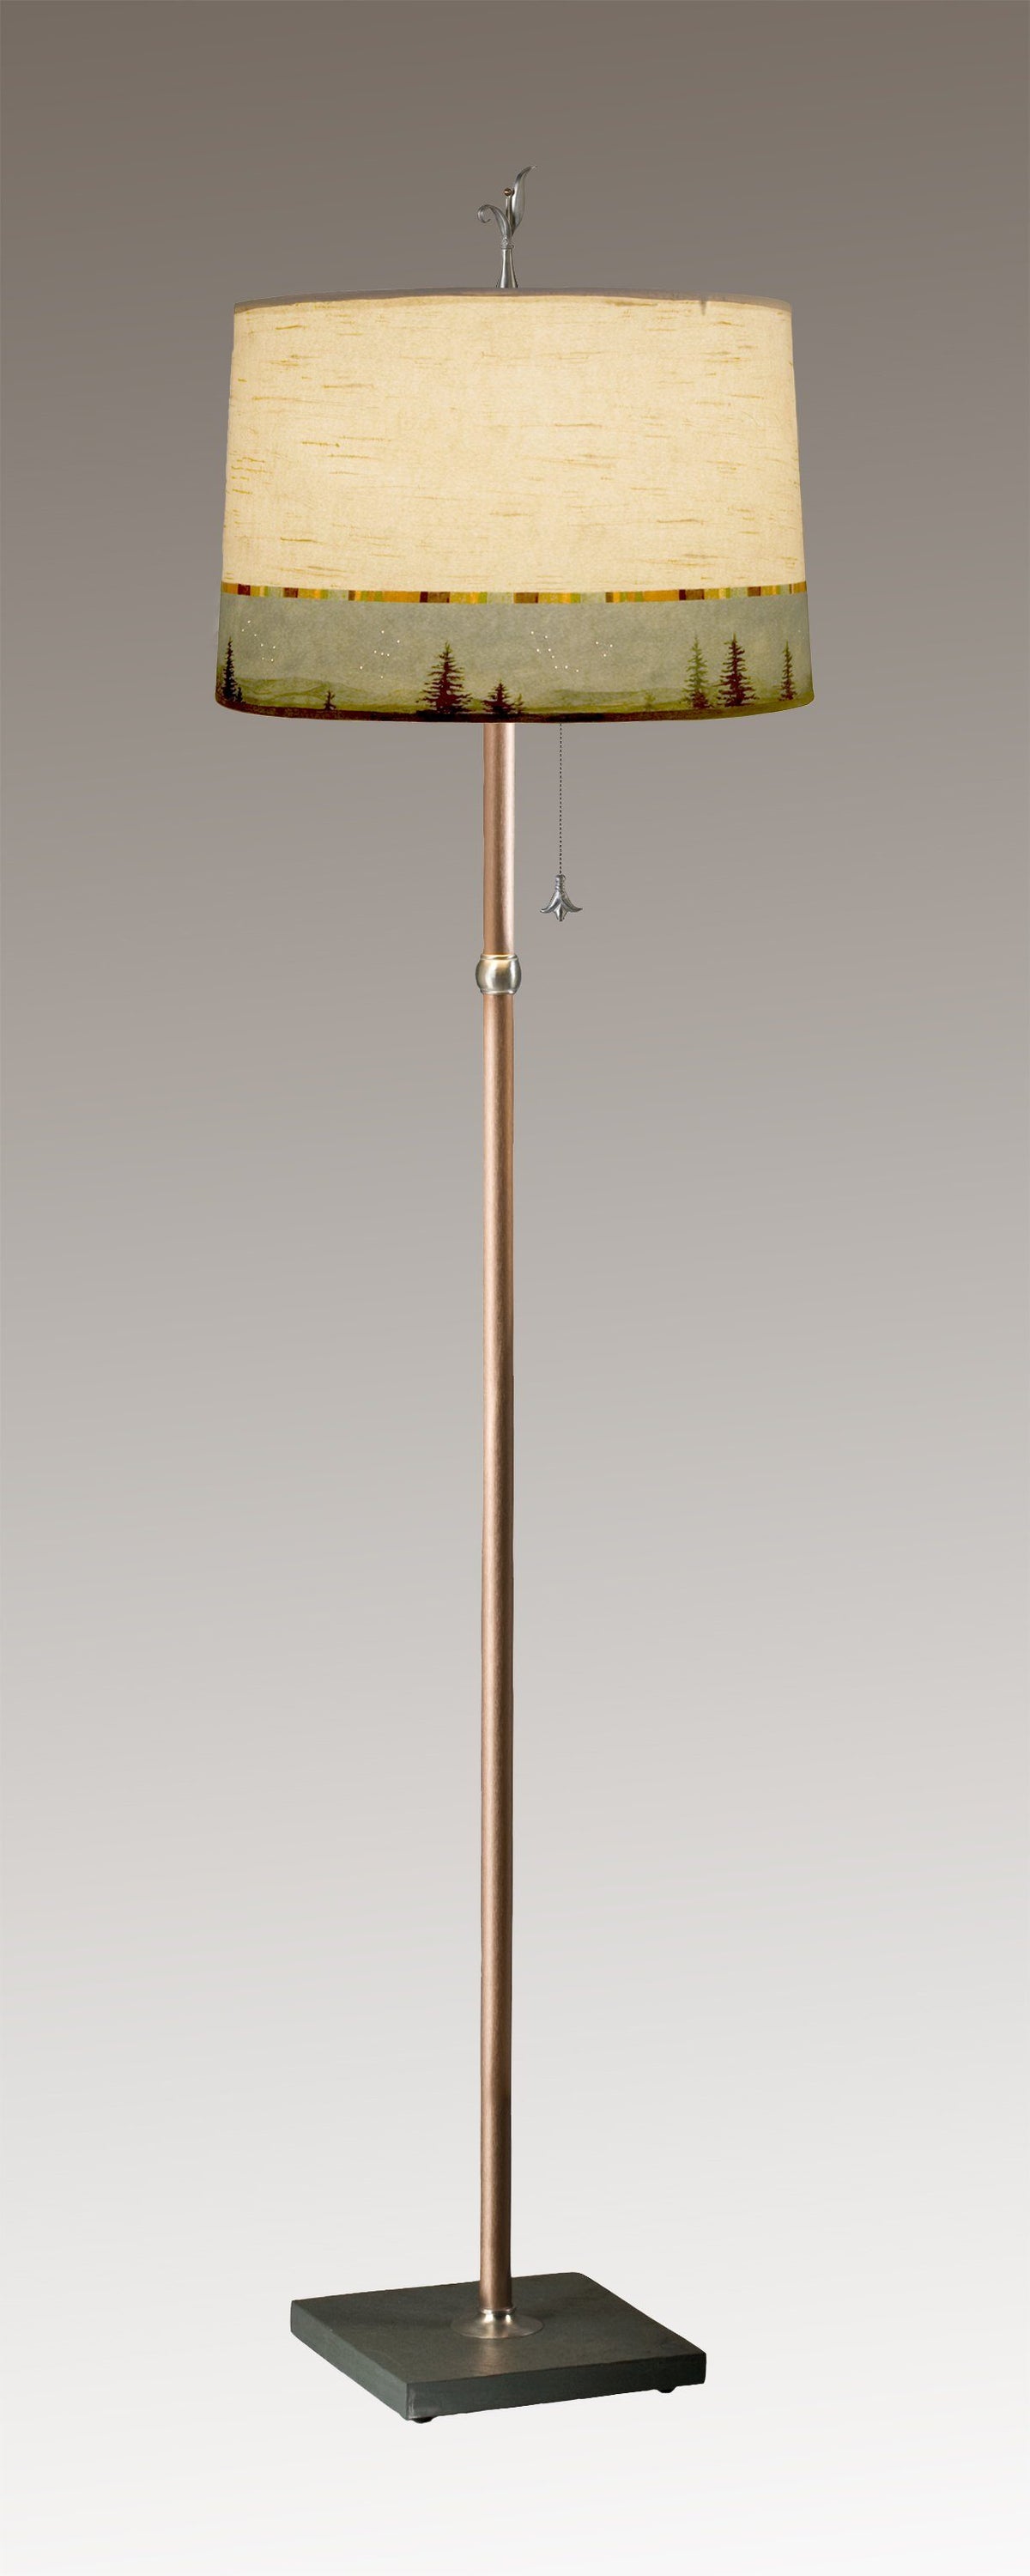 Copper Floor Lamp with Large Drum Shade in Birch Midnight